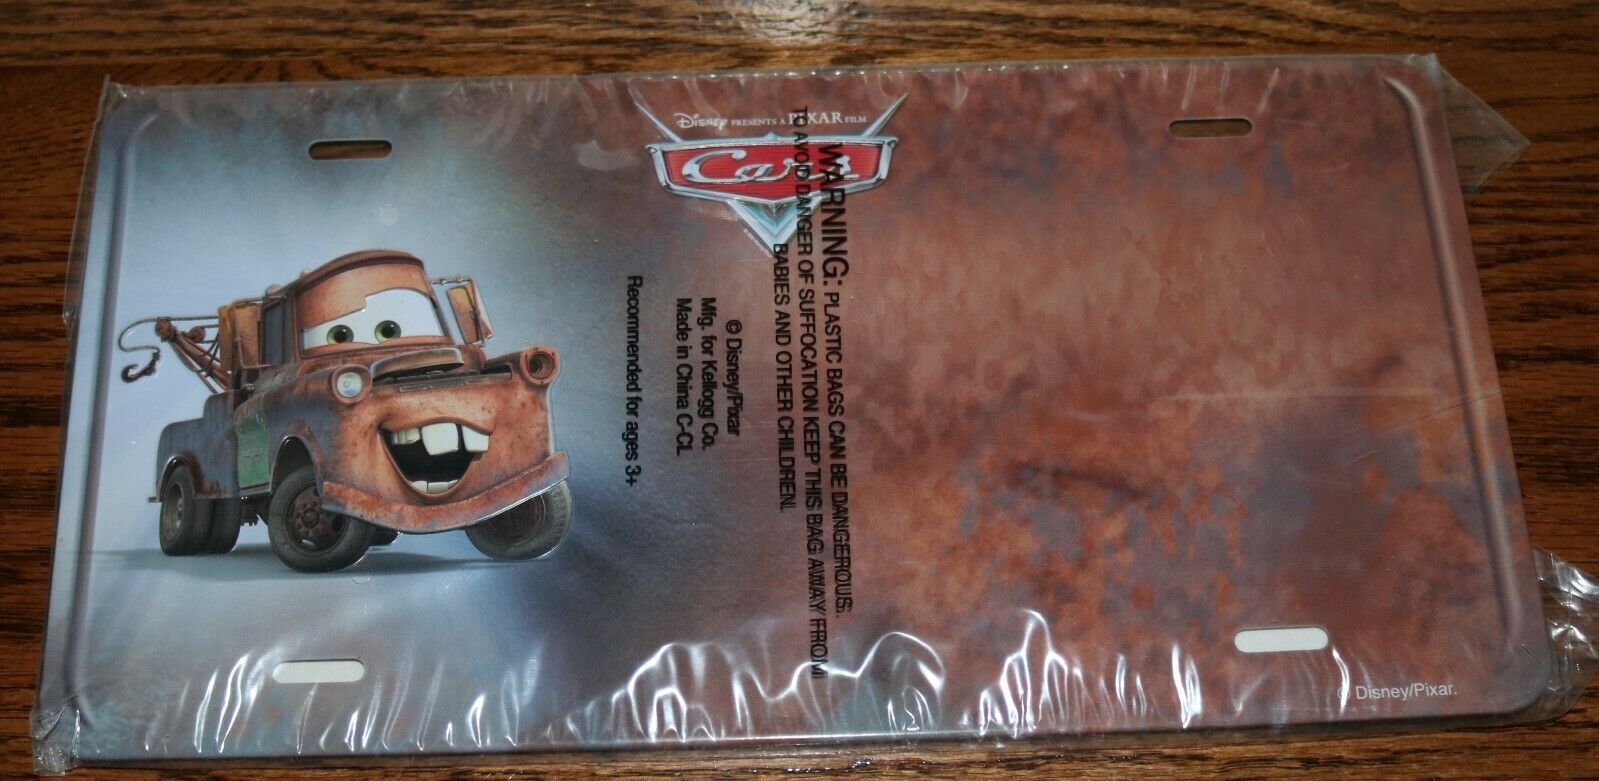 Disney Pixar Cars Mater Personalizable License Plate With Letter Stickers - New